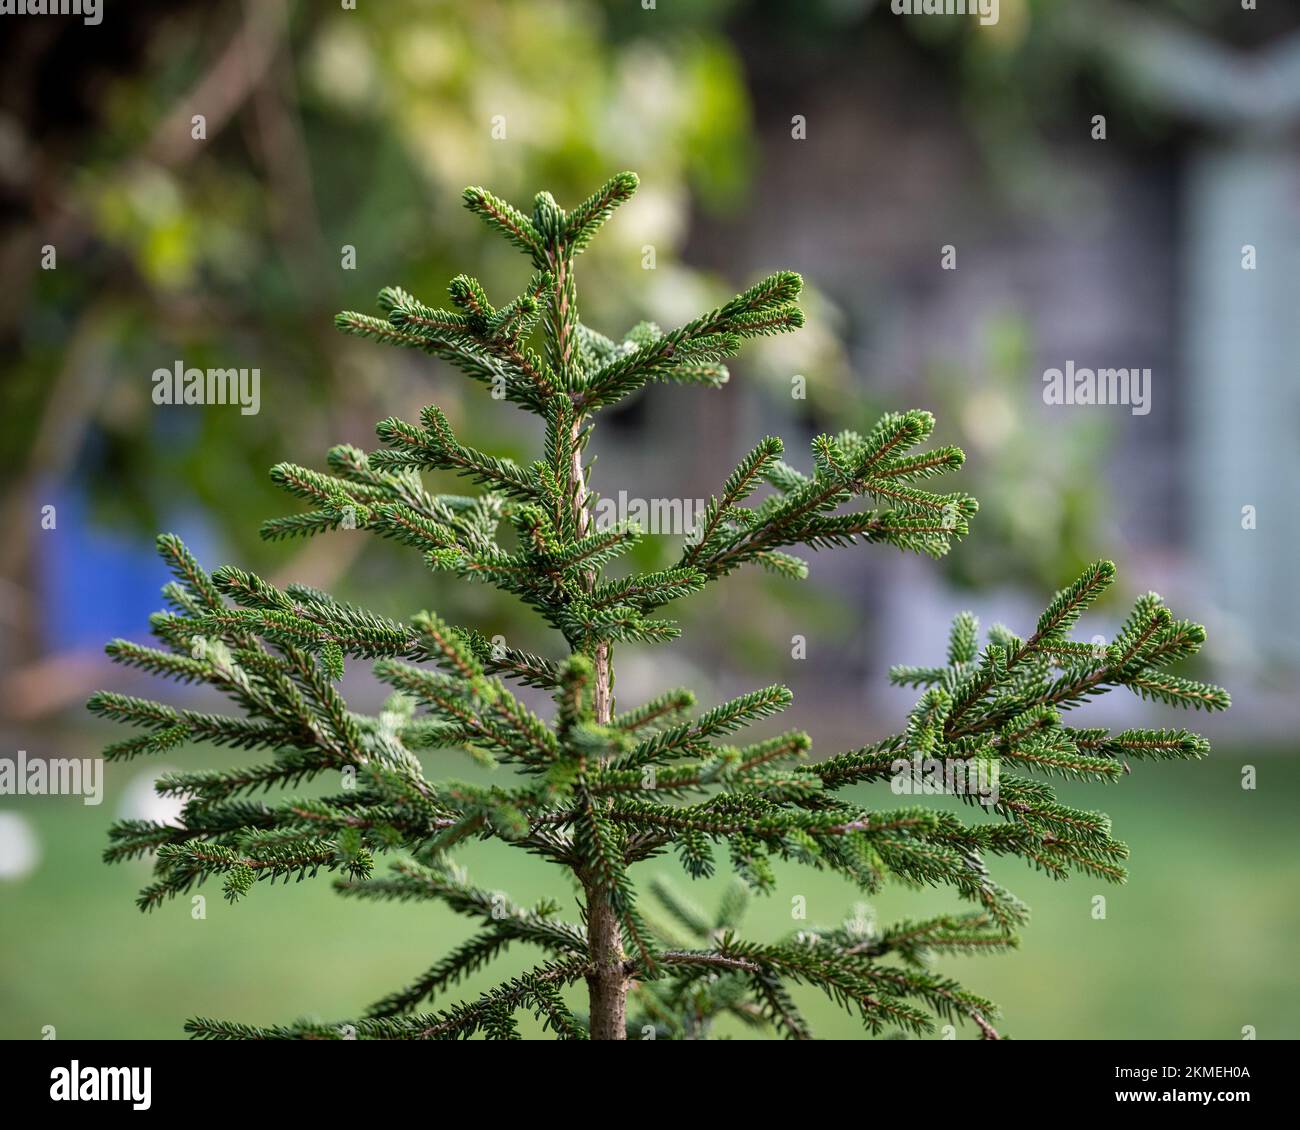 A shallow focus shot of Picea glehnii plants in the garden Stock Photo